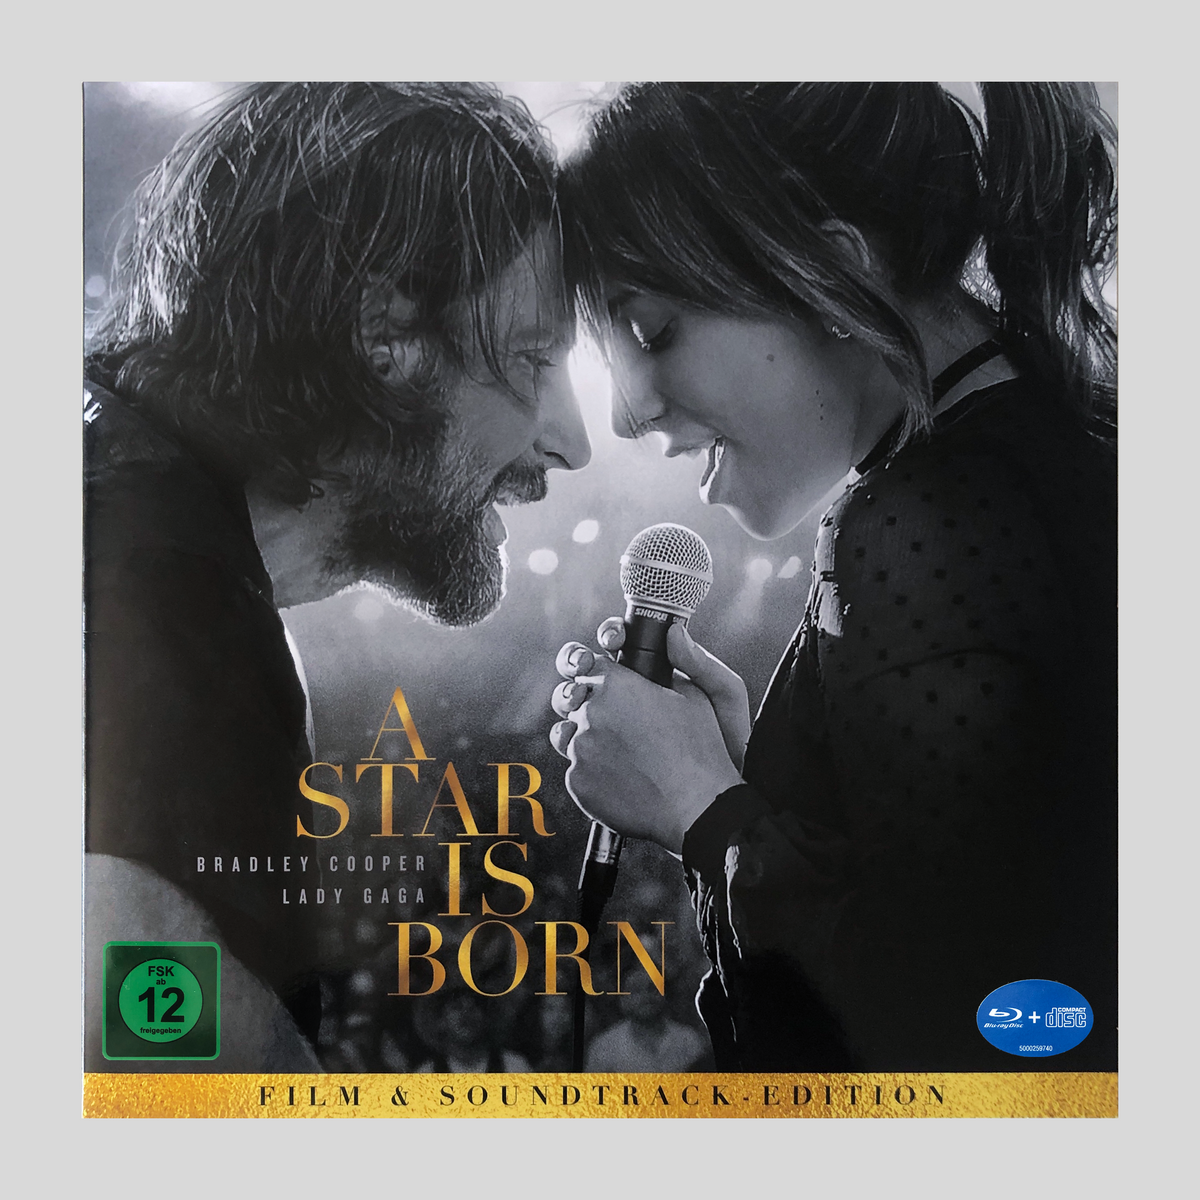 A Star Is Born​ (Film & Soundtrack Edition)